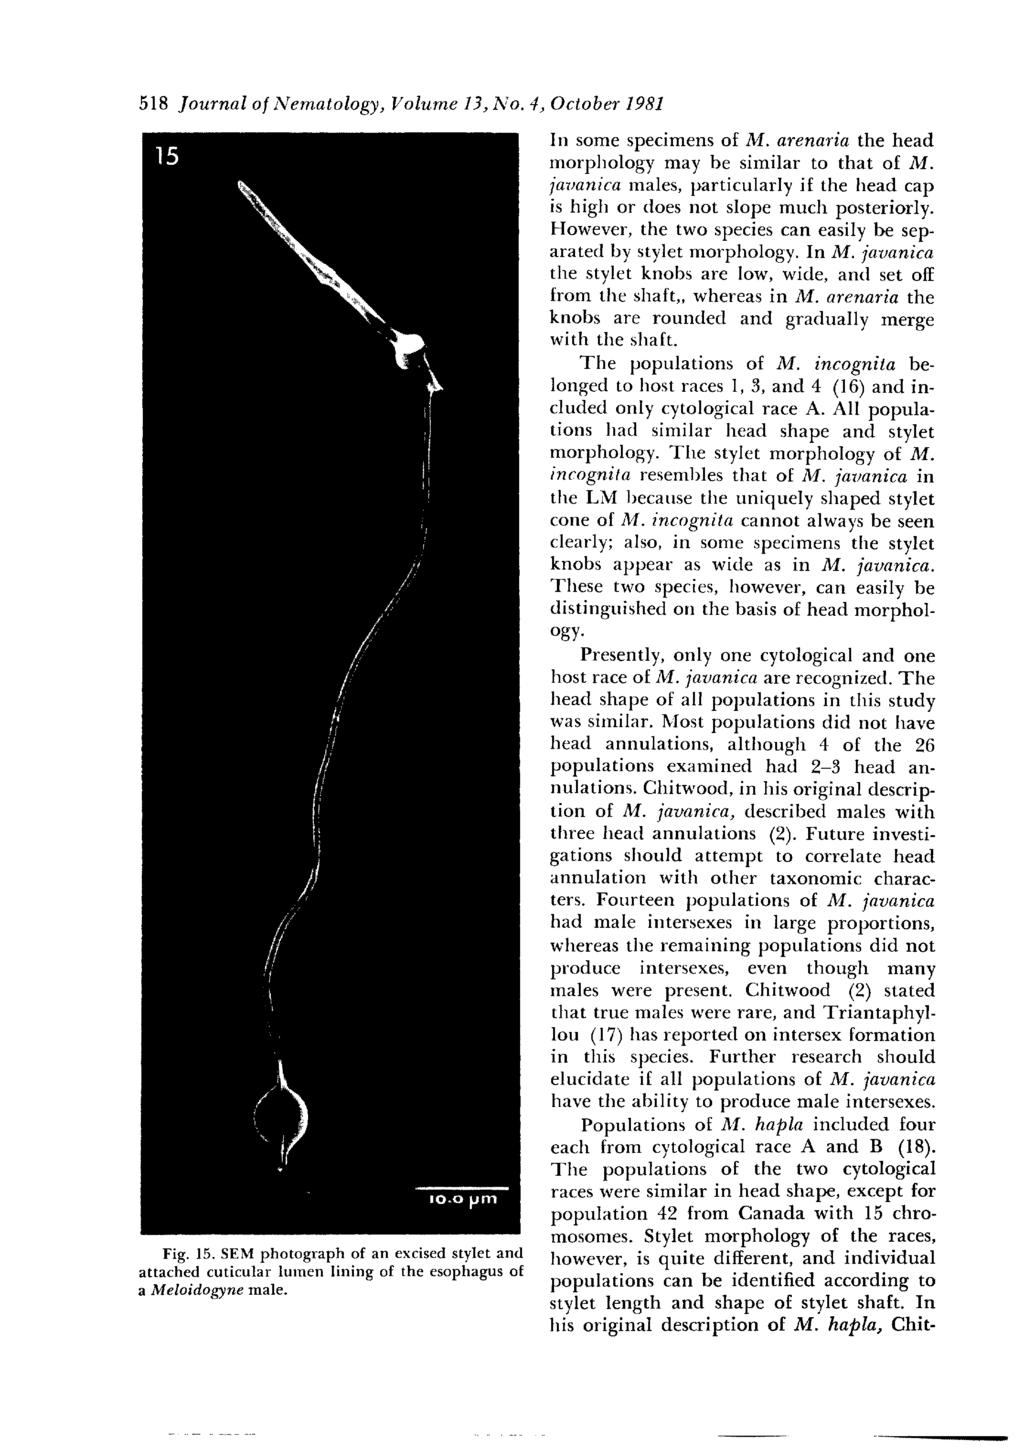 518 Journal of Nematology, Volume 13, No. 4, October 1981 15 / /i ti / /7 ~o.o pm Fig. 15. SEM photograph of an excised stylet and attached cuticular lumen lining of the esophagus of a Meloidogyne male.